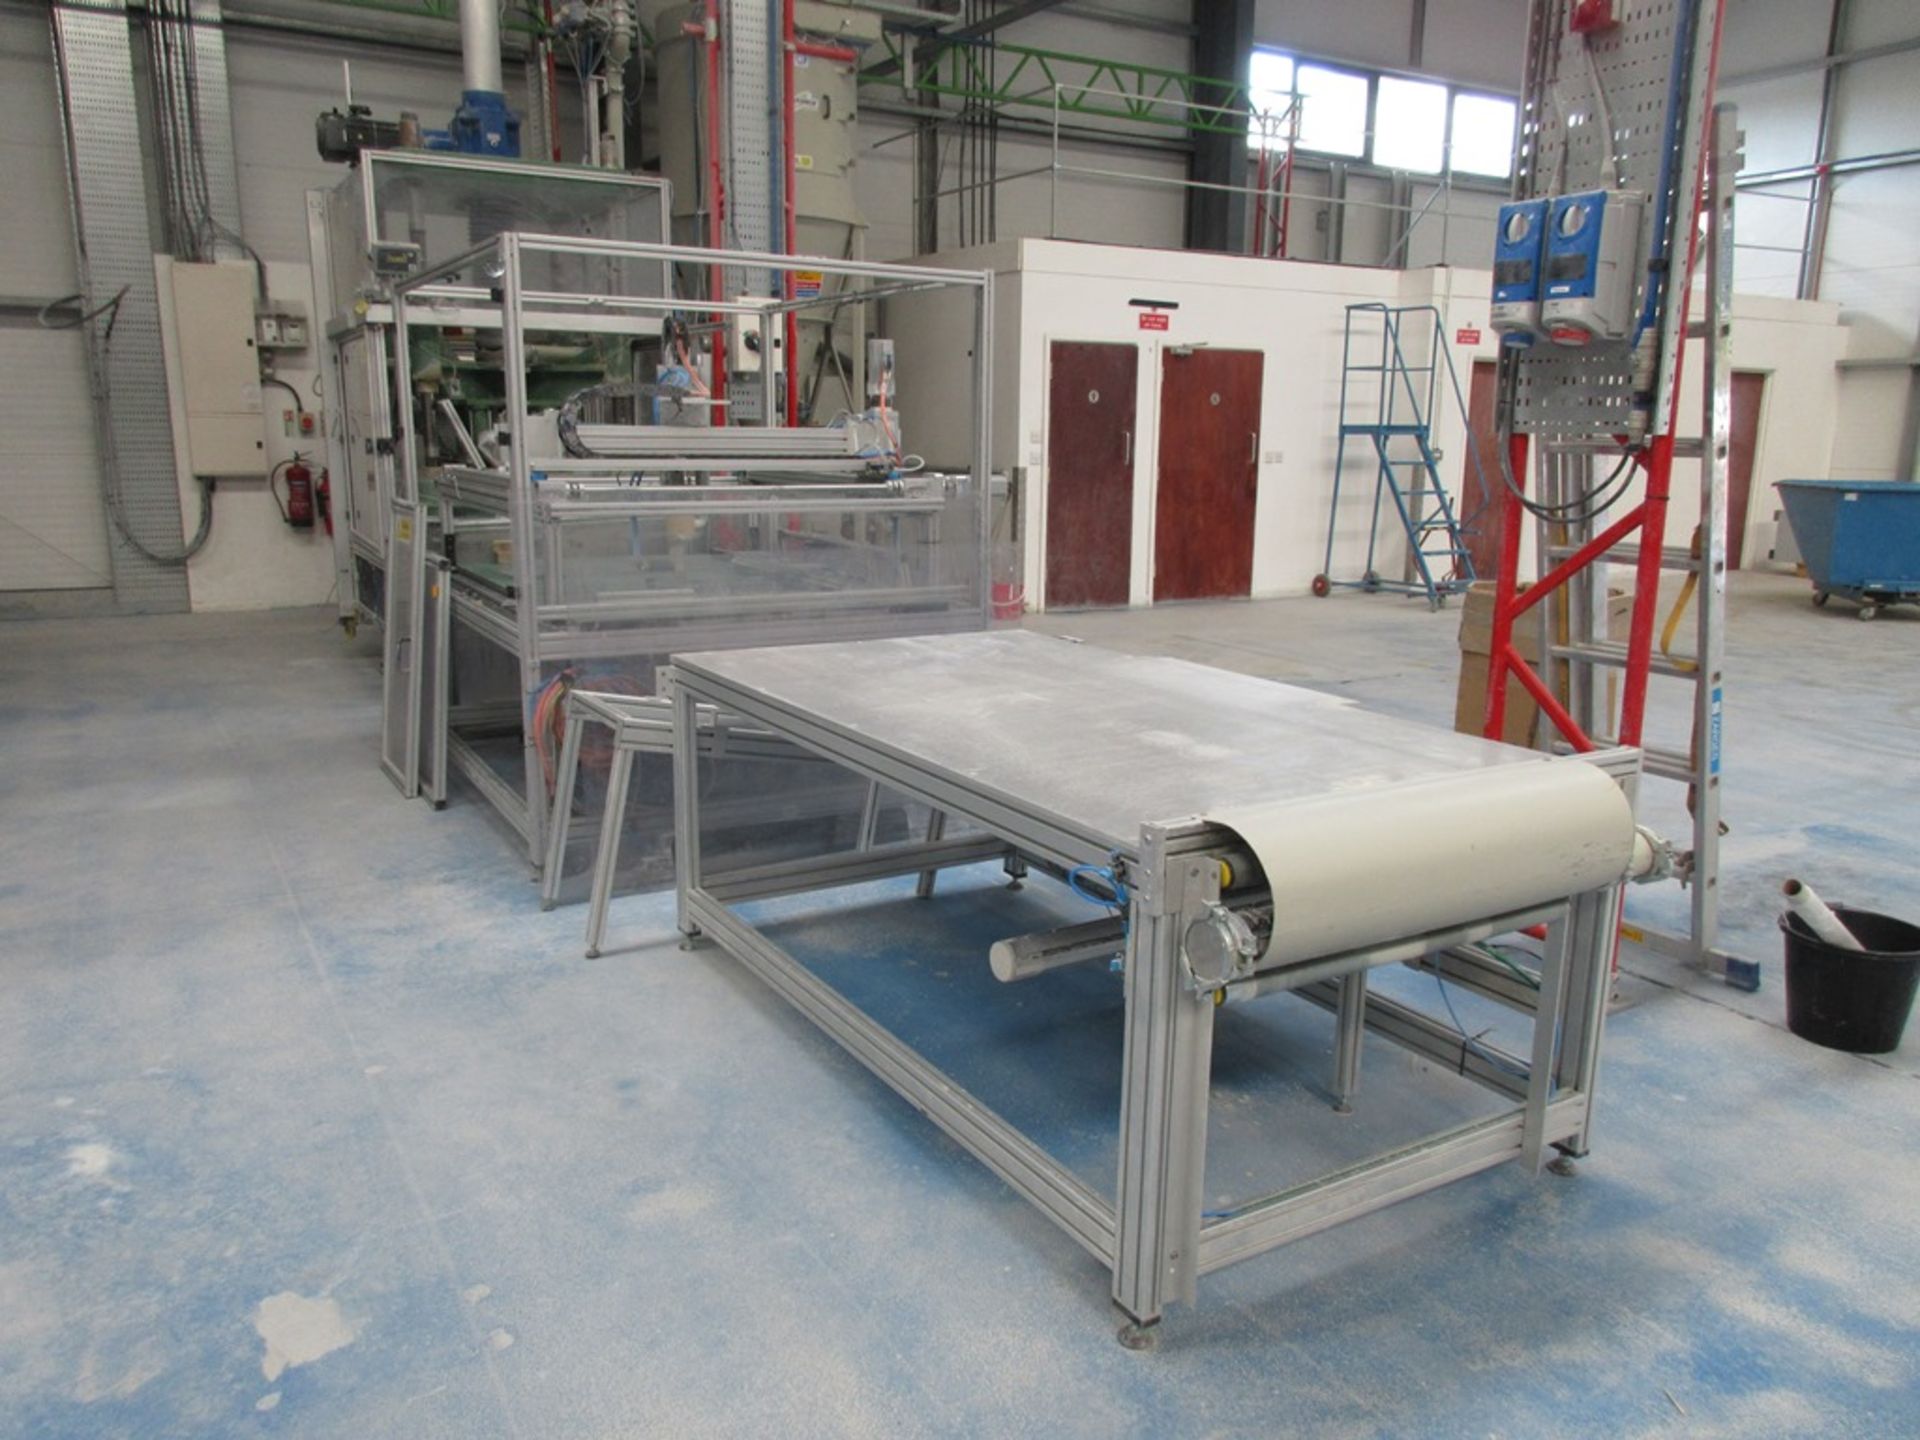 Gasbarre insulation board, 28 tonne electric press, serial no. 20201571, bed size 680 x 980mm,